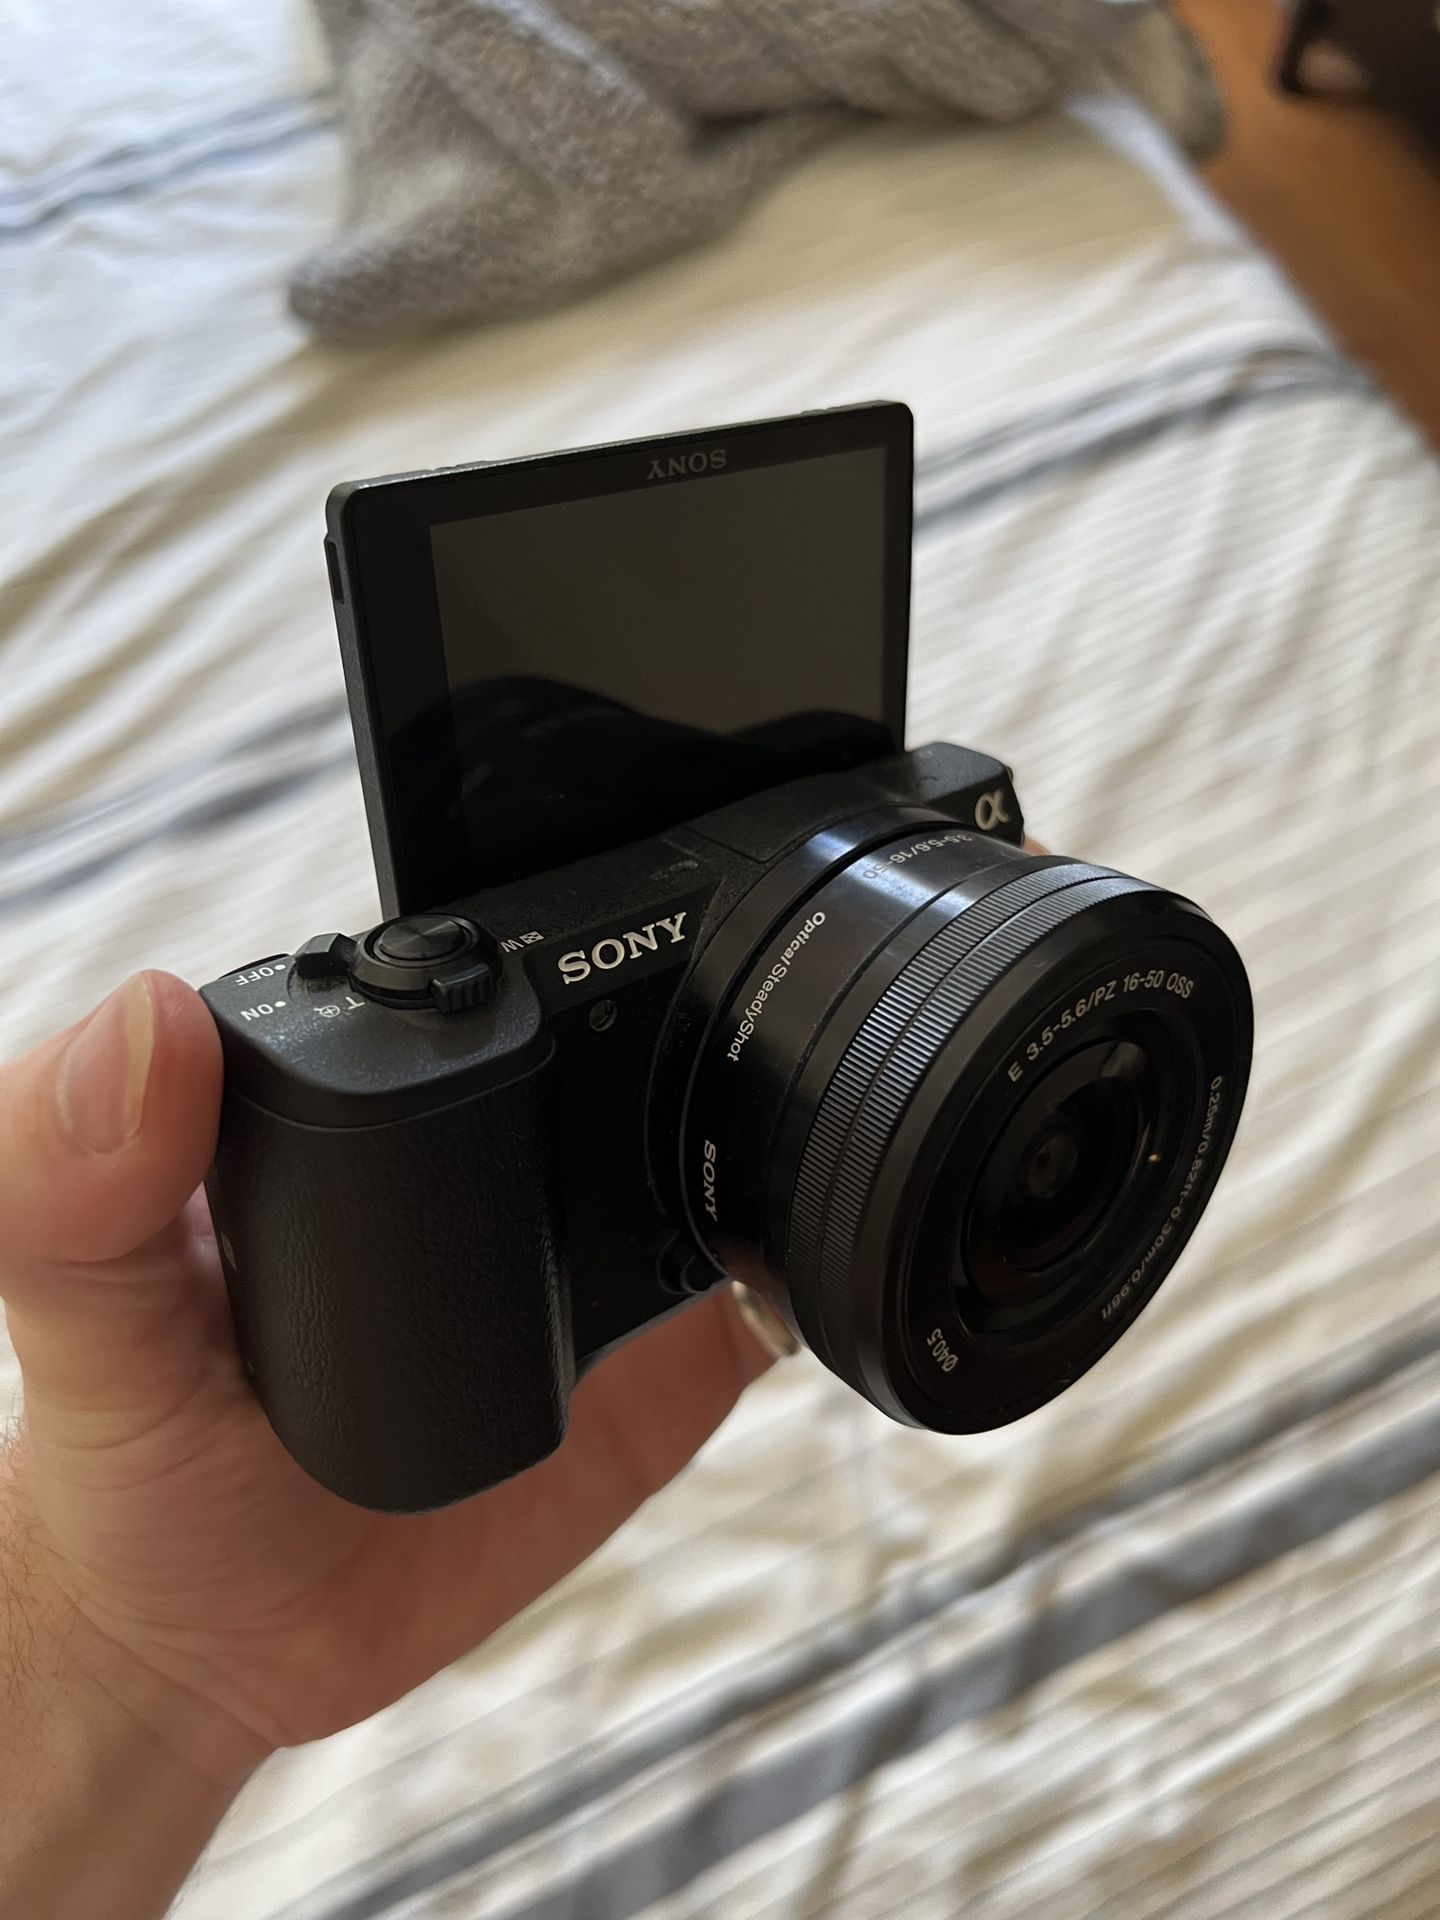 Sony a5100 with Kit Lens